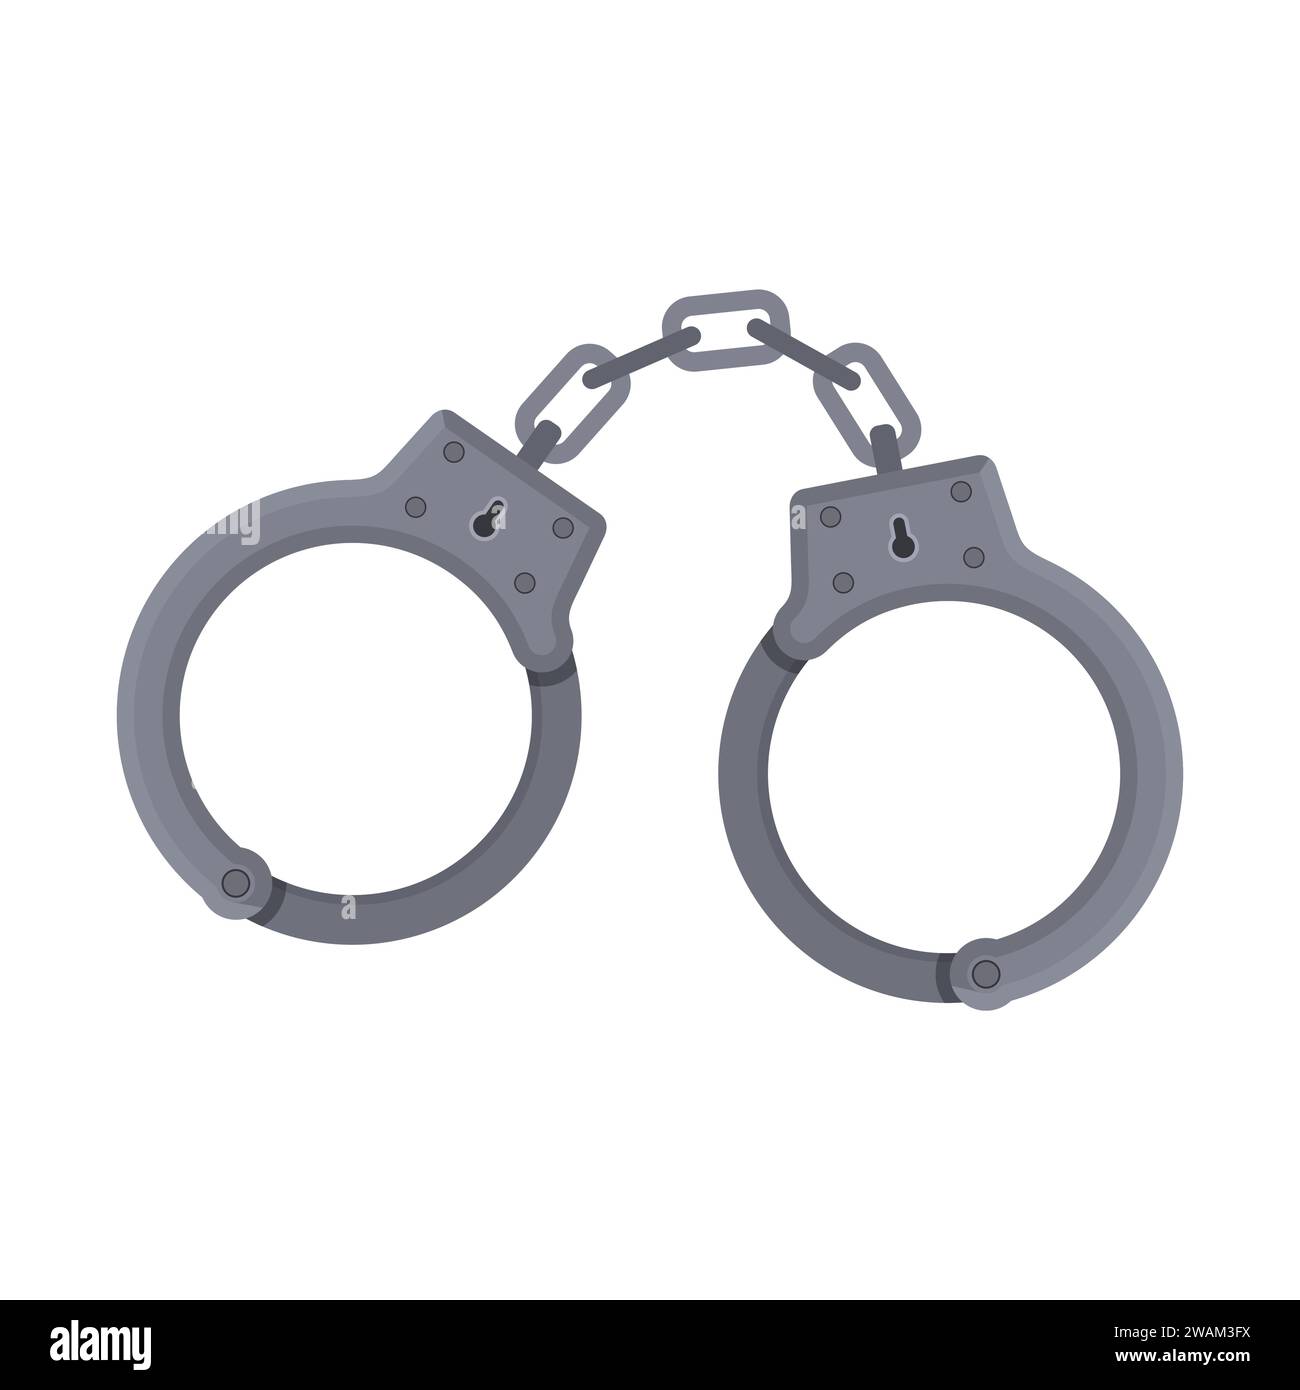 Metal handcuffs for detaining criminals isolated on white background. Outfit of a policeman. Element of police and prison icon of arrest of offender. Stock Vector